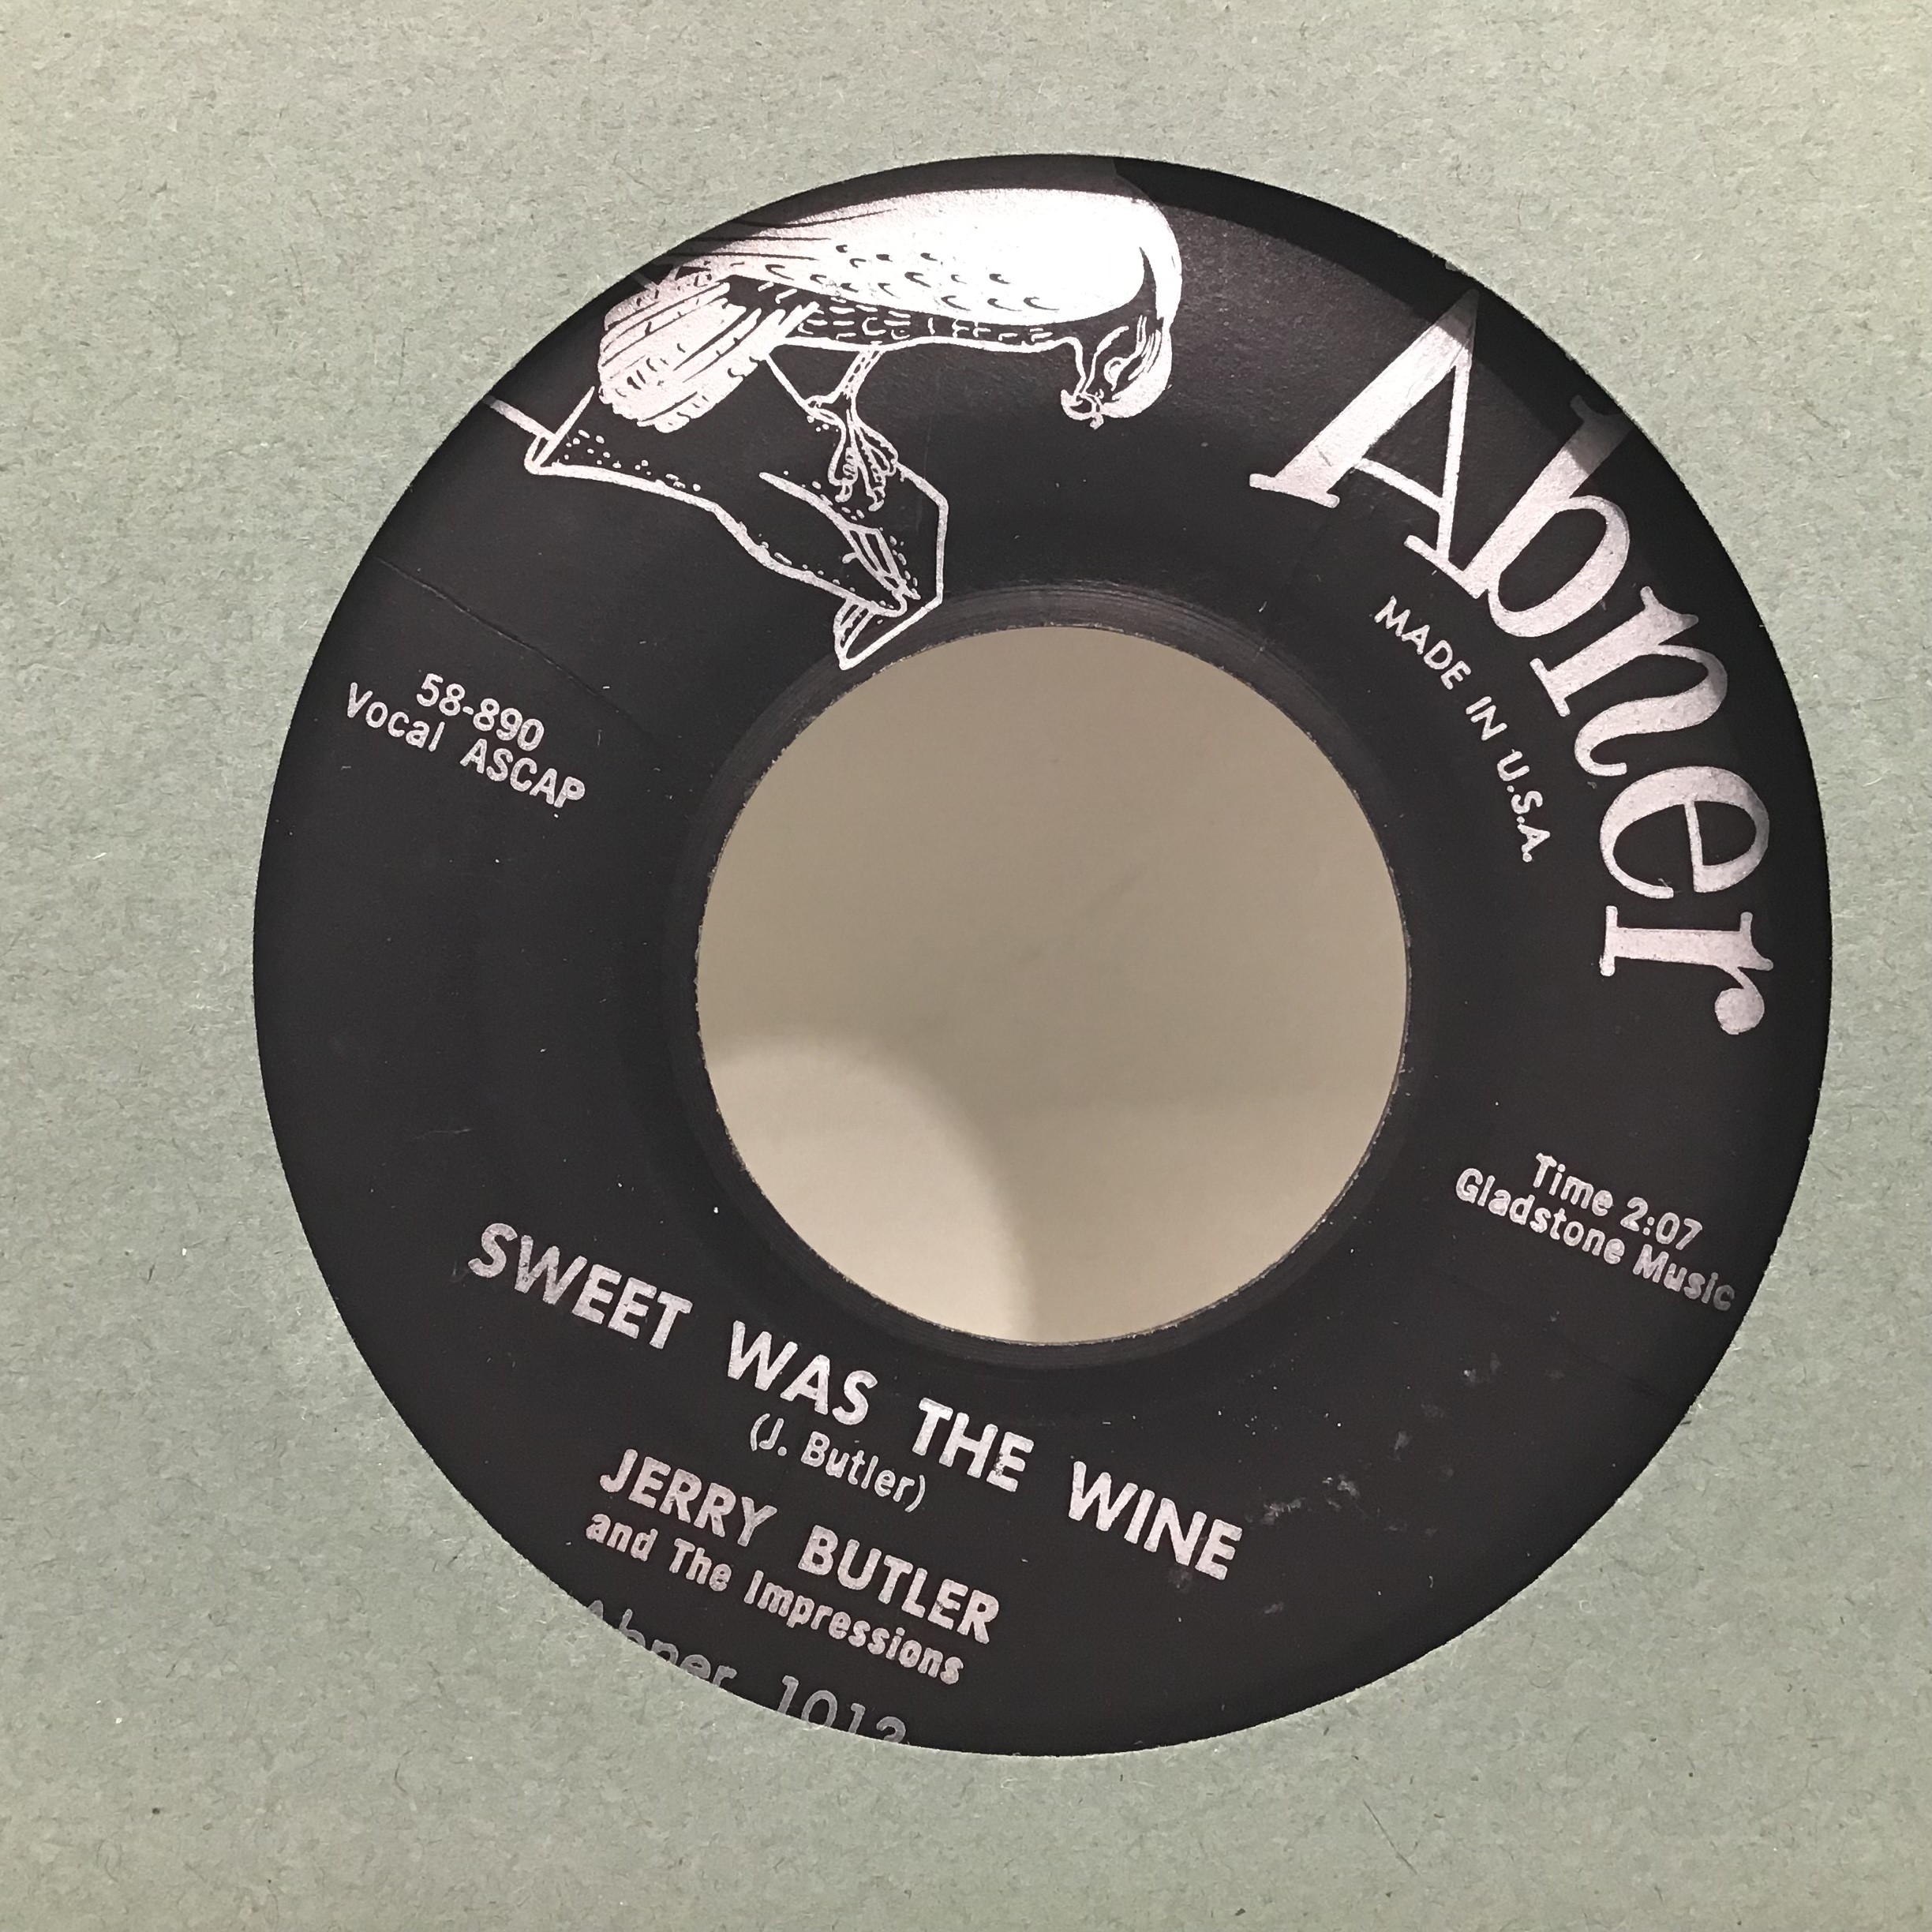 JERRY BUTLER 7" 'FOR YOUR PRECIOUS LOVE'. Great Doo Wop 45 here on Abner Records 1013 released in - Image 2 of 2